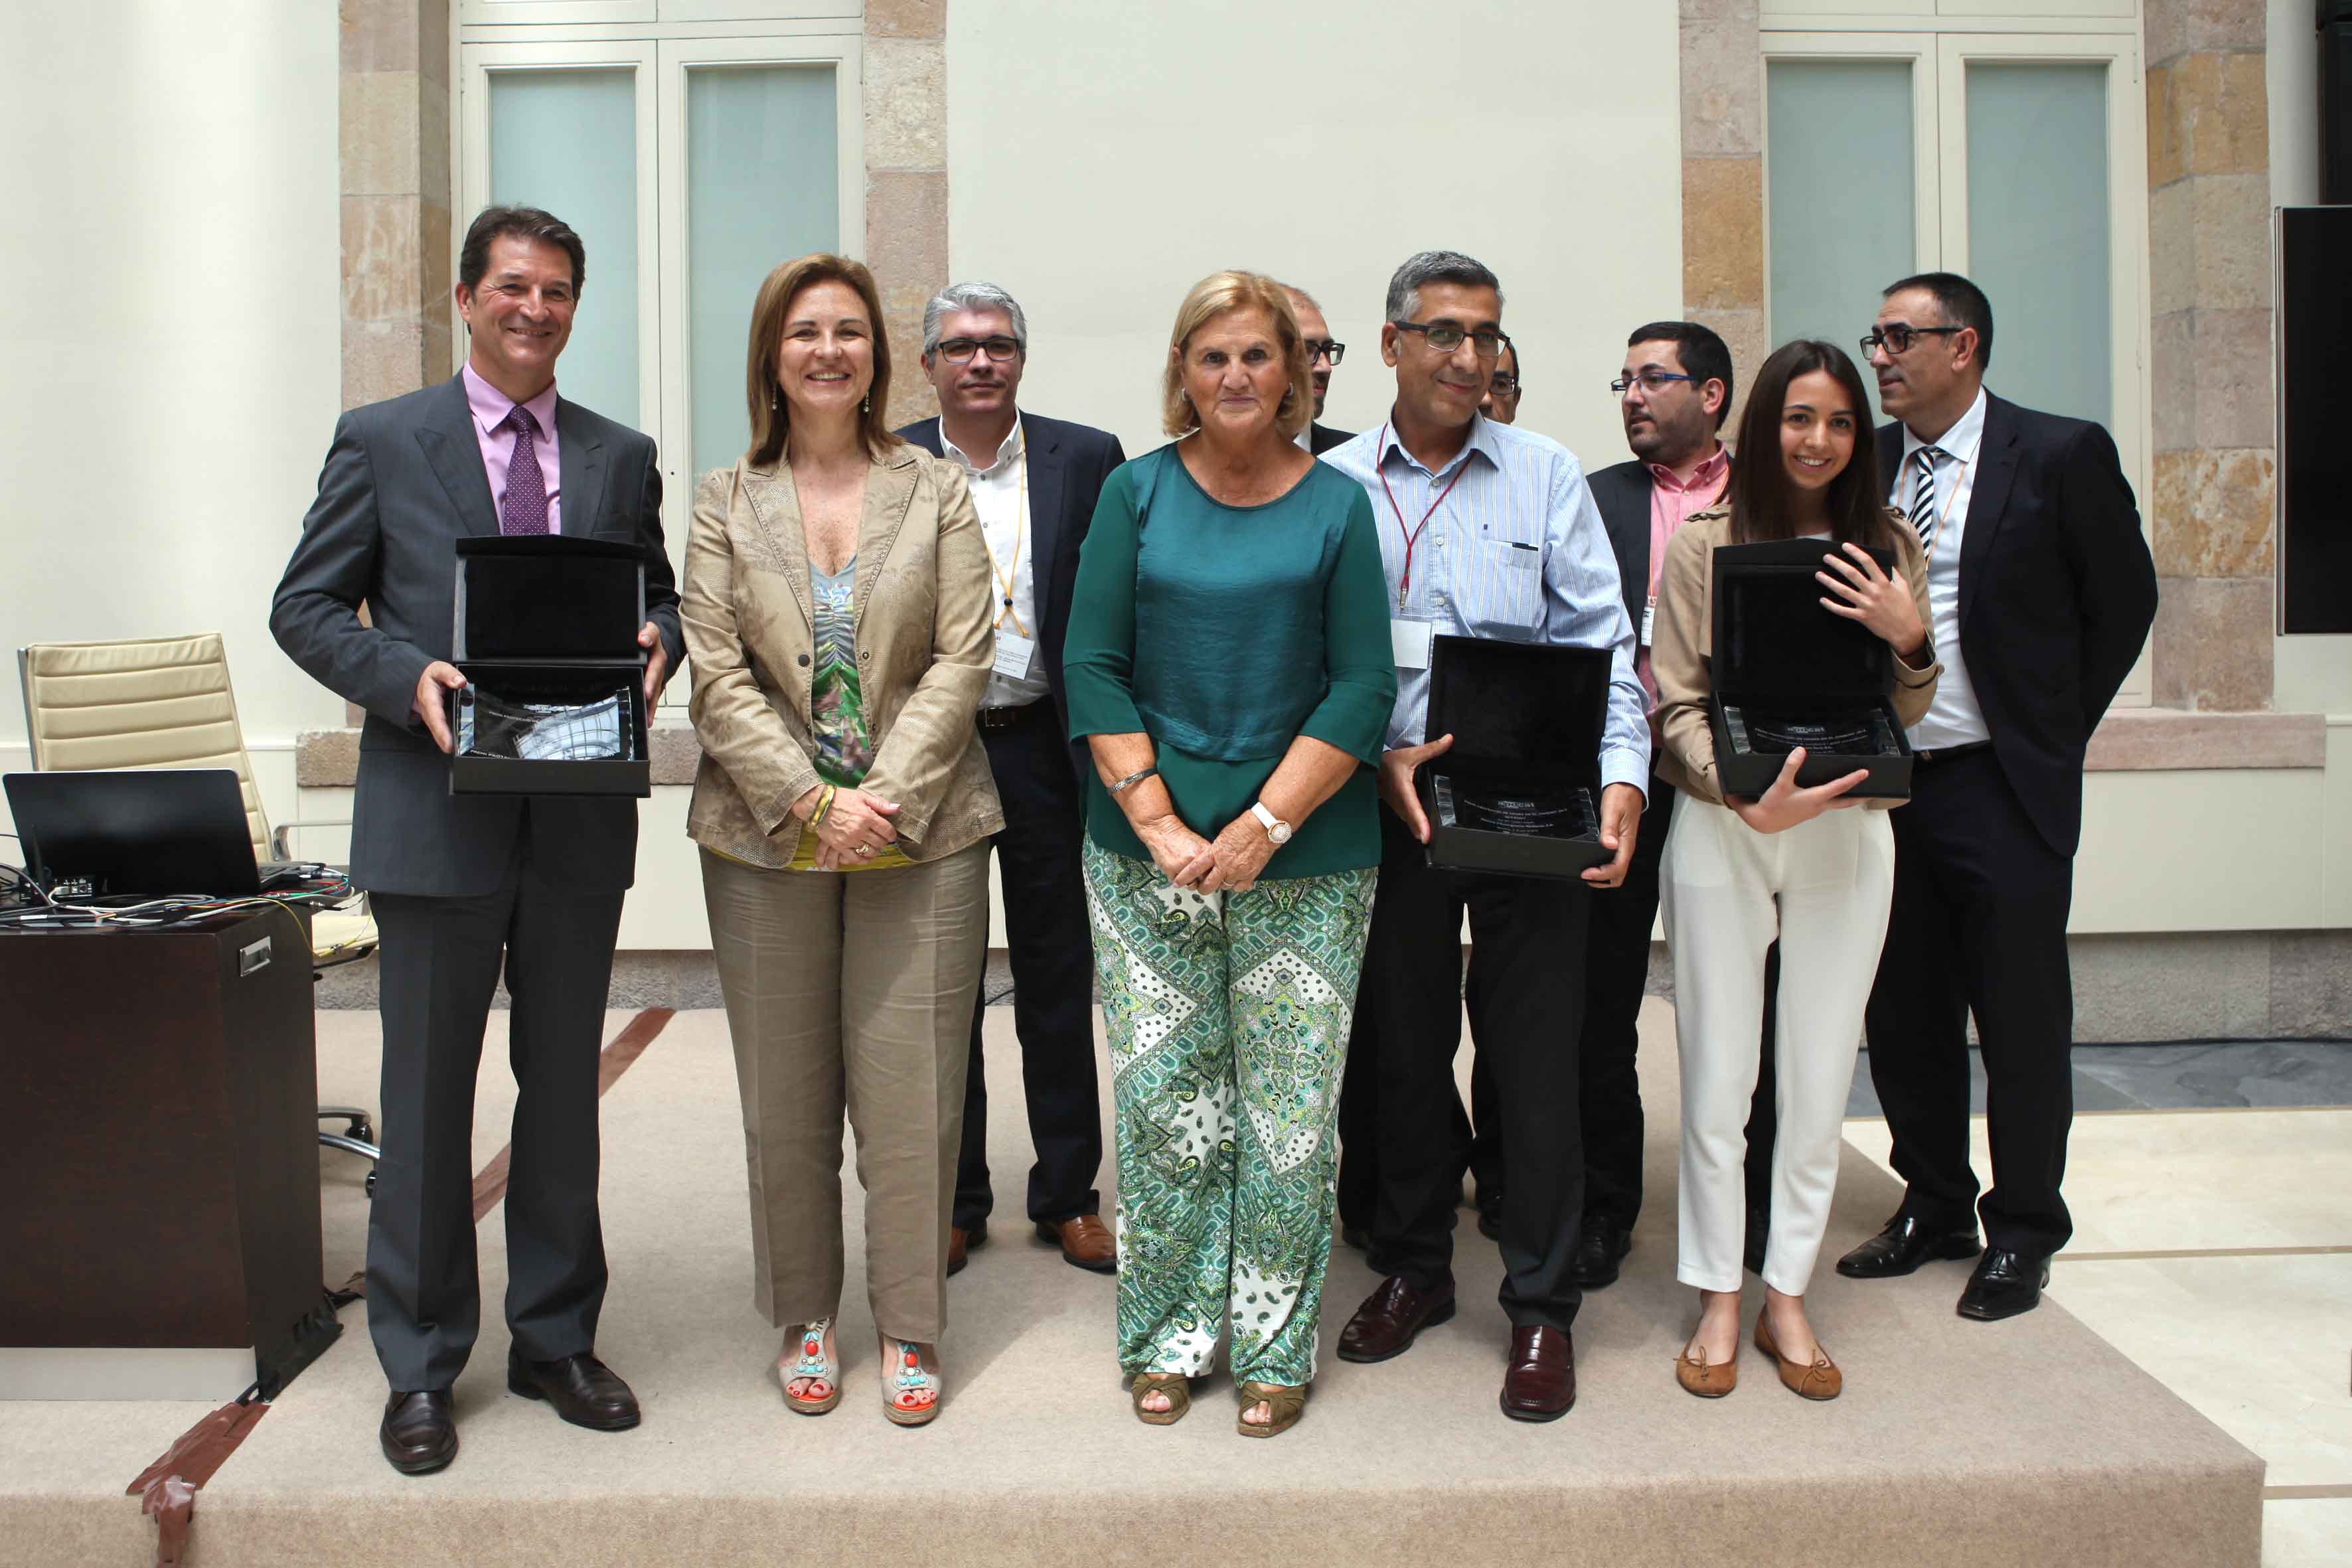 The prize winners with the Speaker of the Catalan Parliament, Núria de Gispert, and the APDCAT director, María Àngels Barbarà.